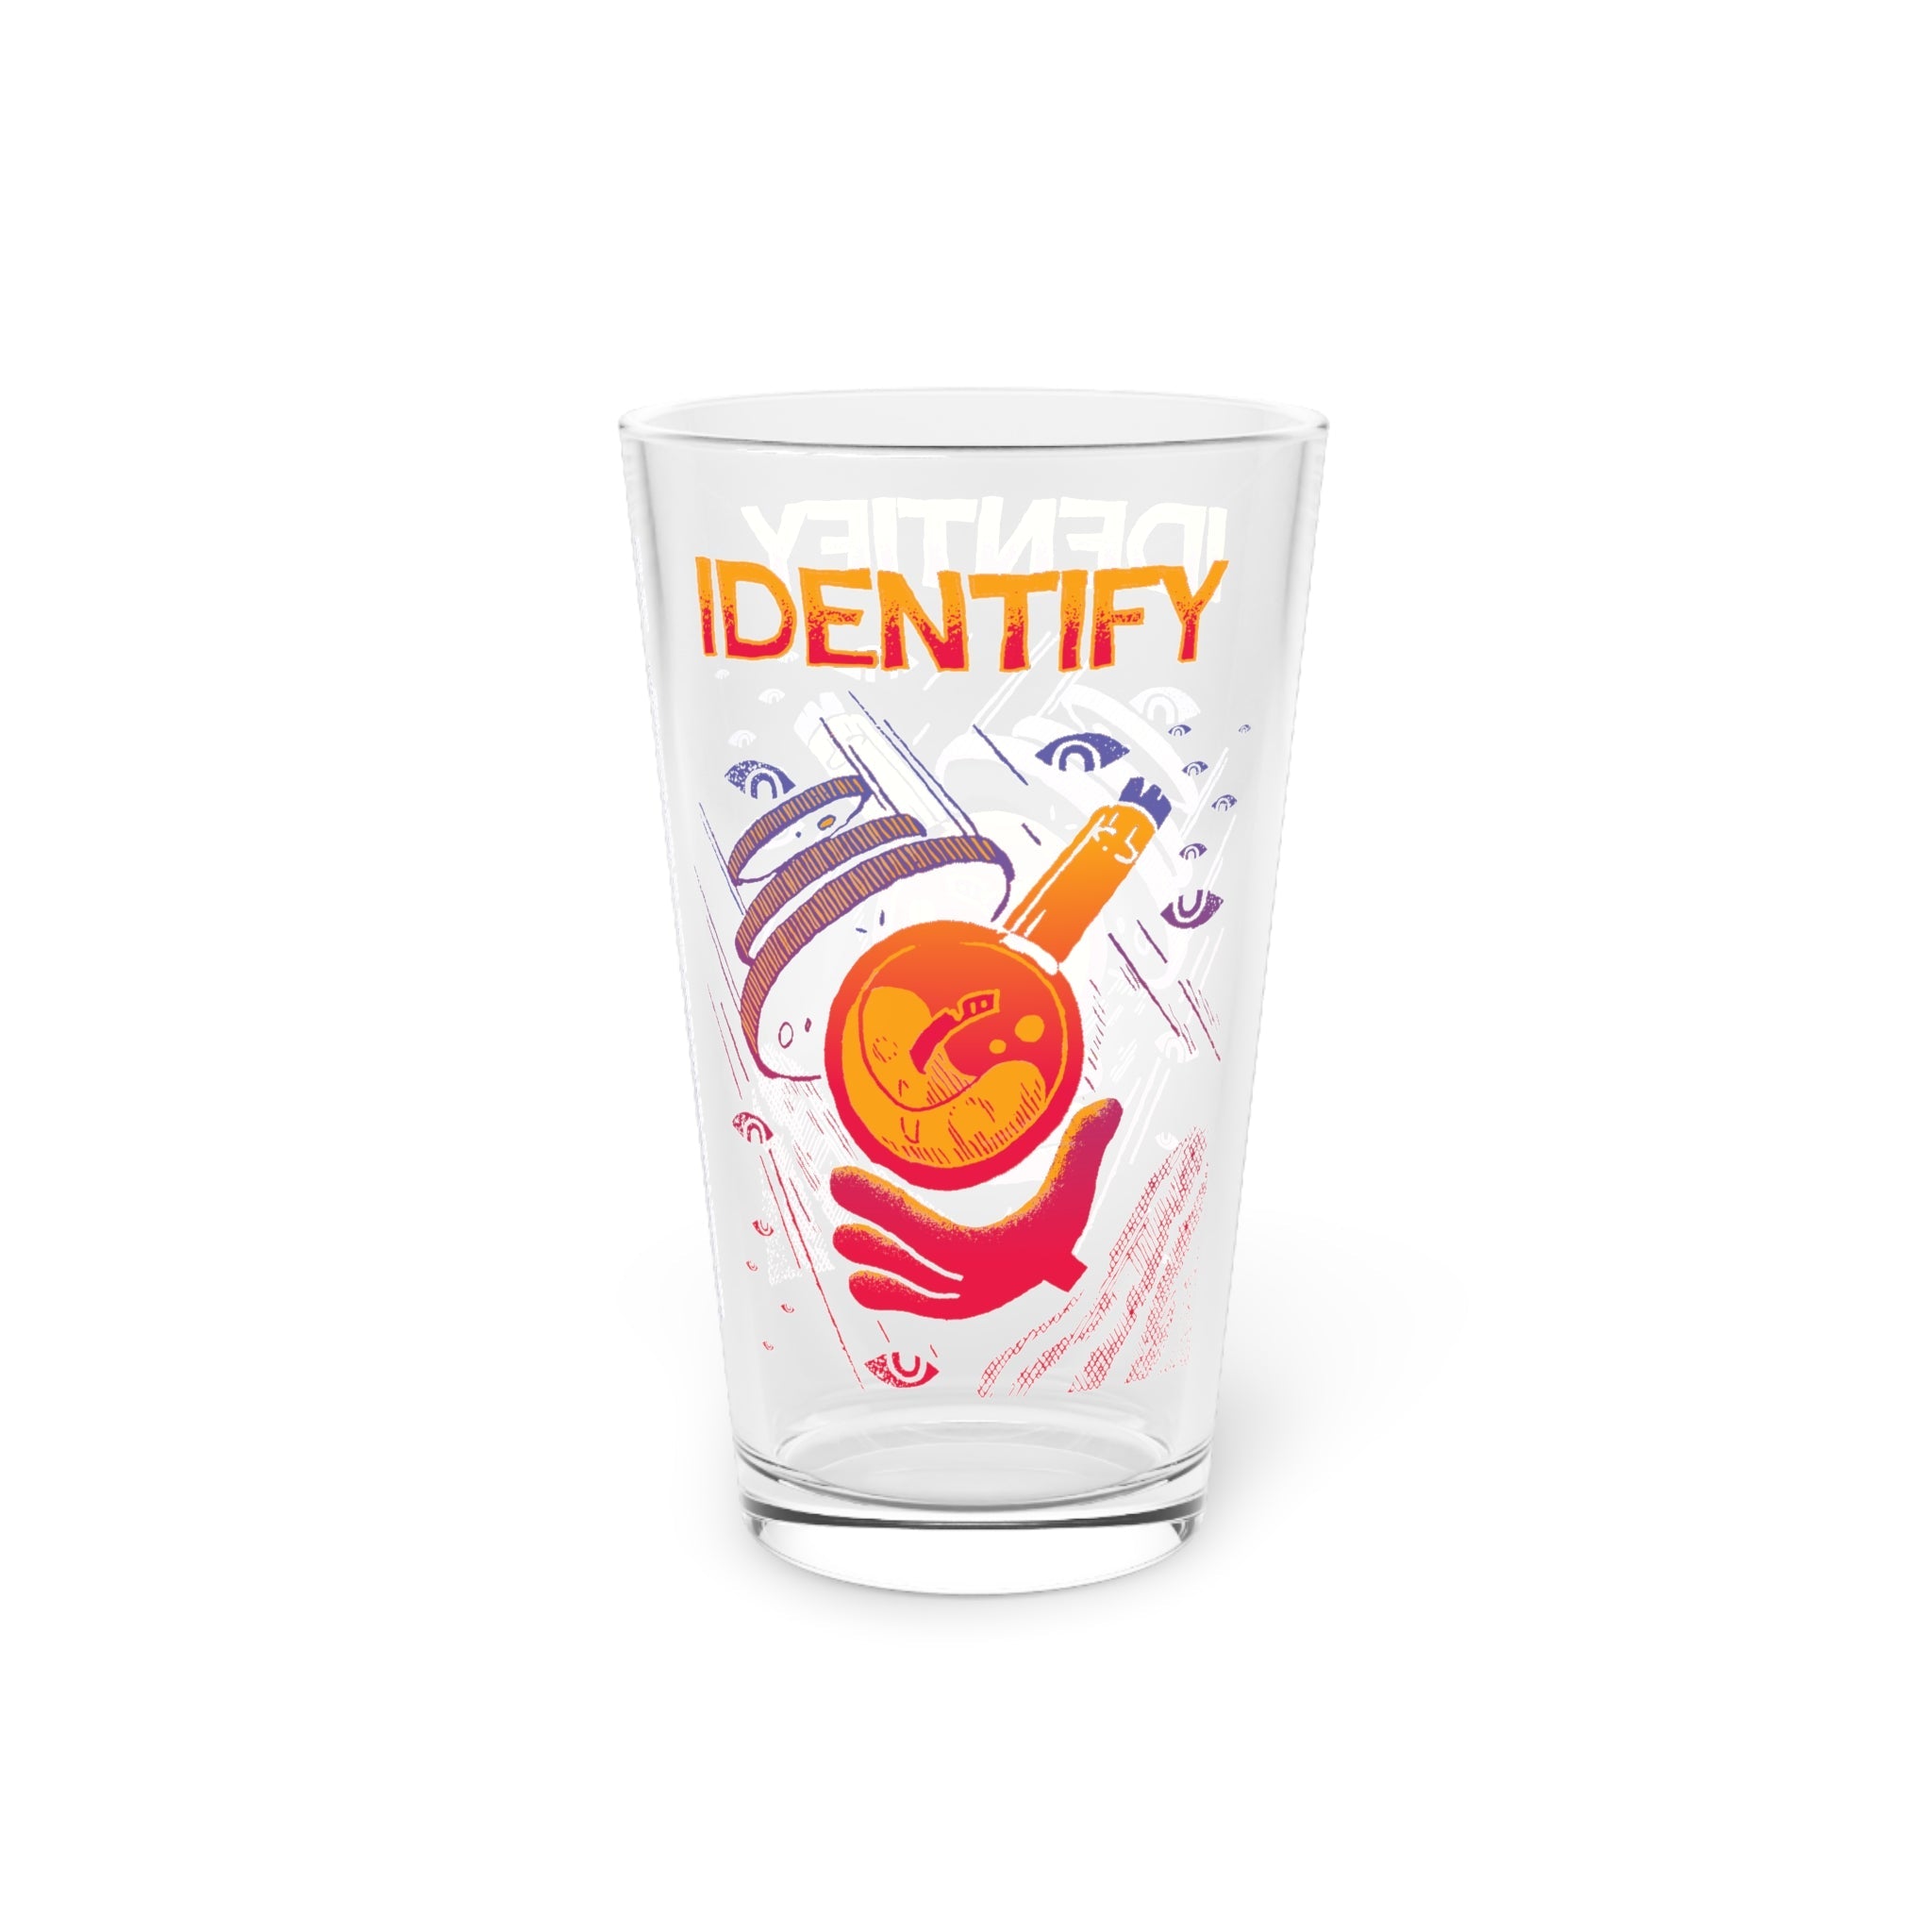 Identify | Pint Glass, 16oz - Drinkware Sets - Ace of Gnomes - 22675162736561258531